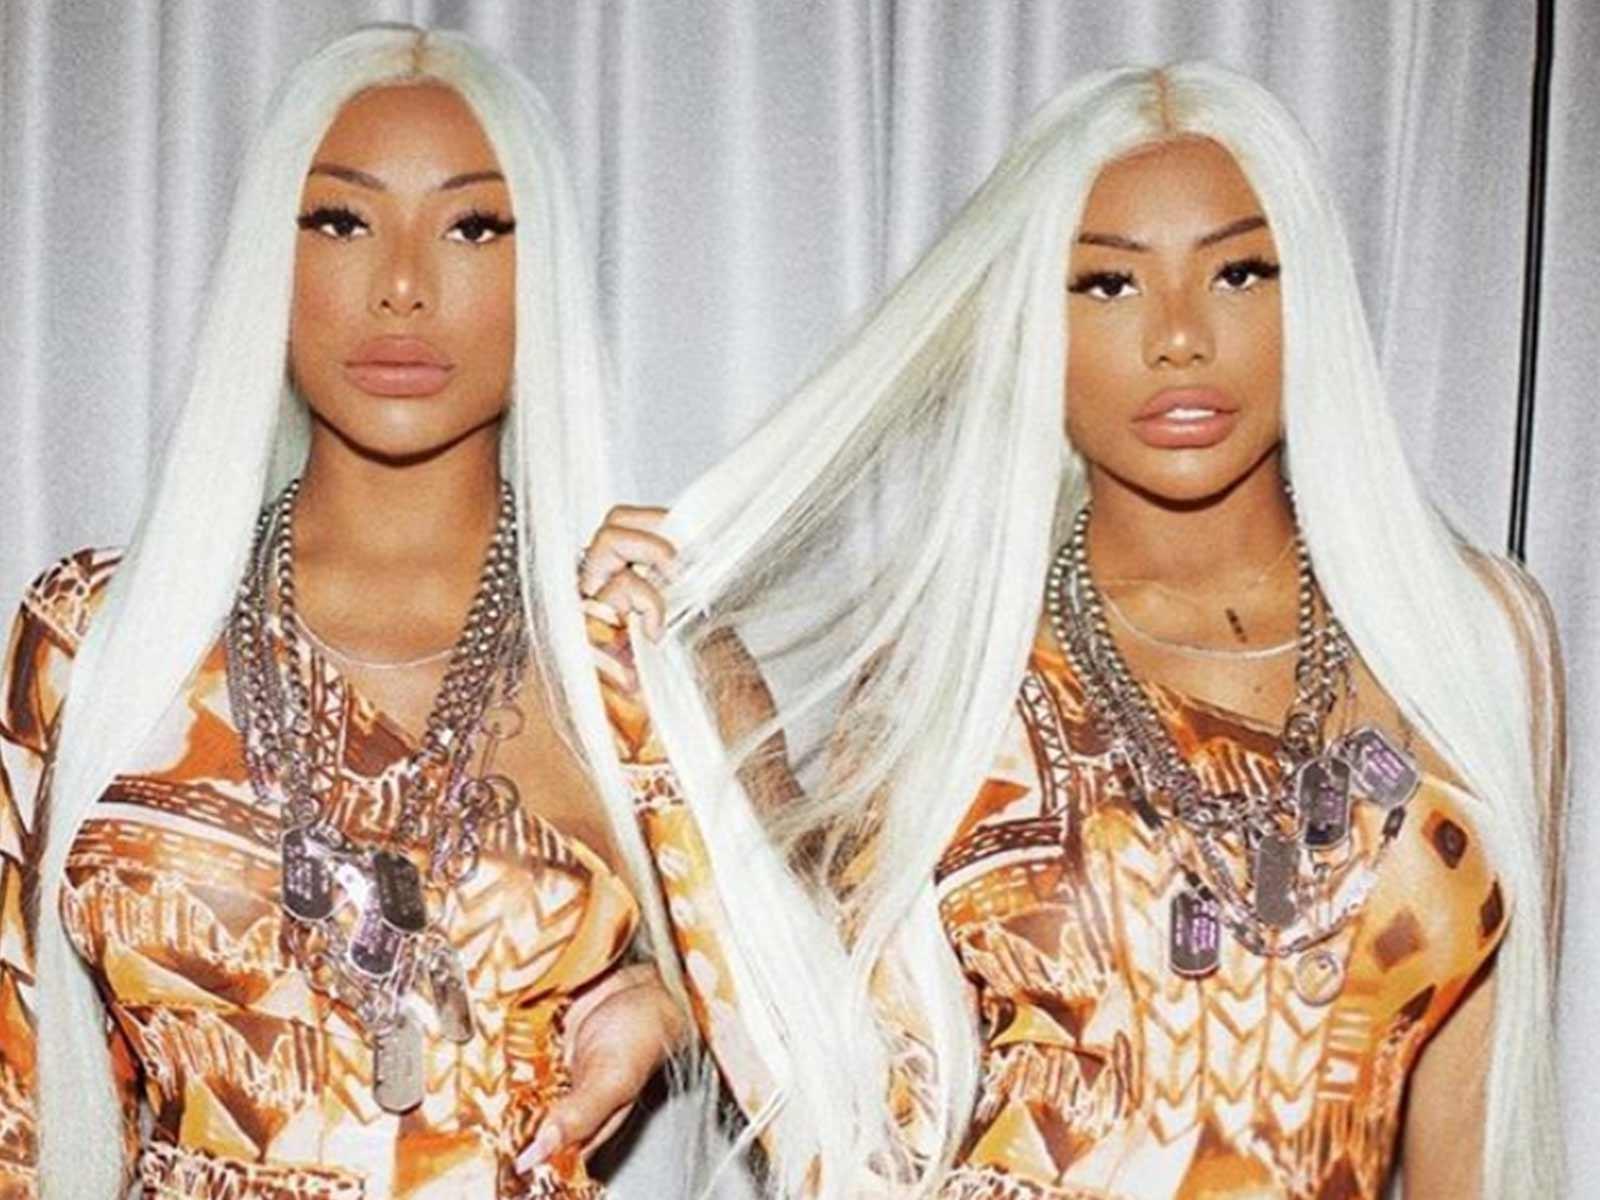 Yeezy Model Shannade Clermont Pleads Guilty to Fraud, Facing Up To 20 Years in Prison